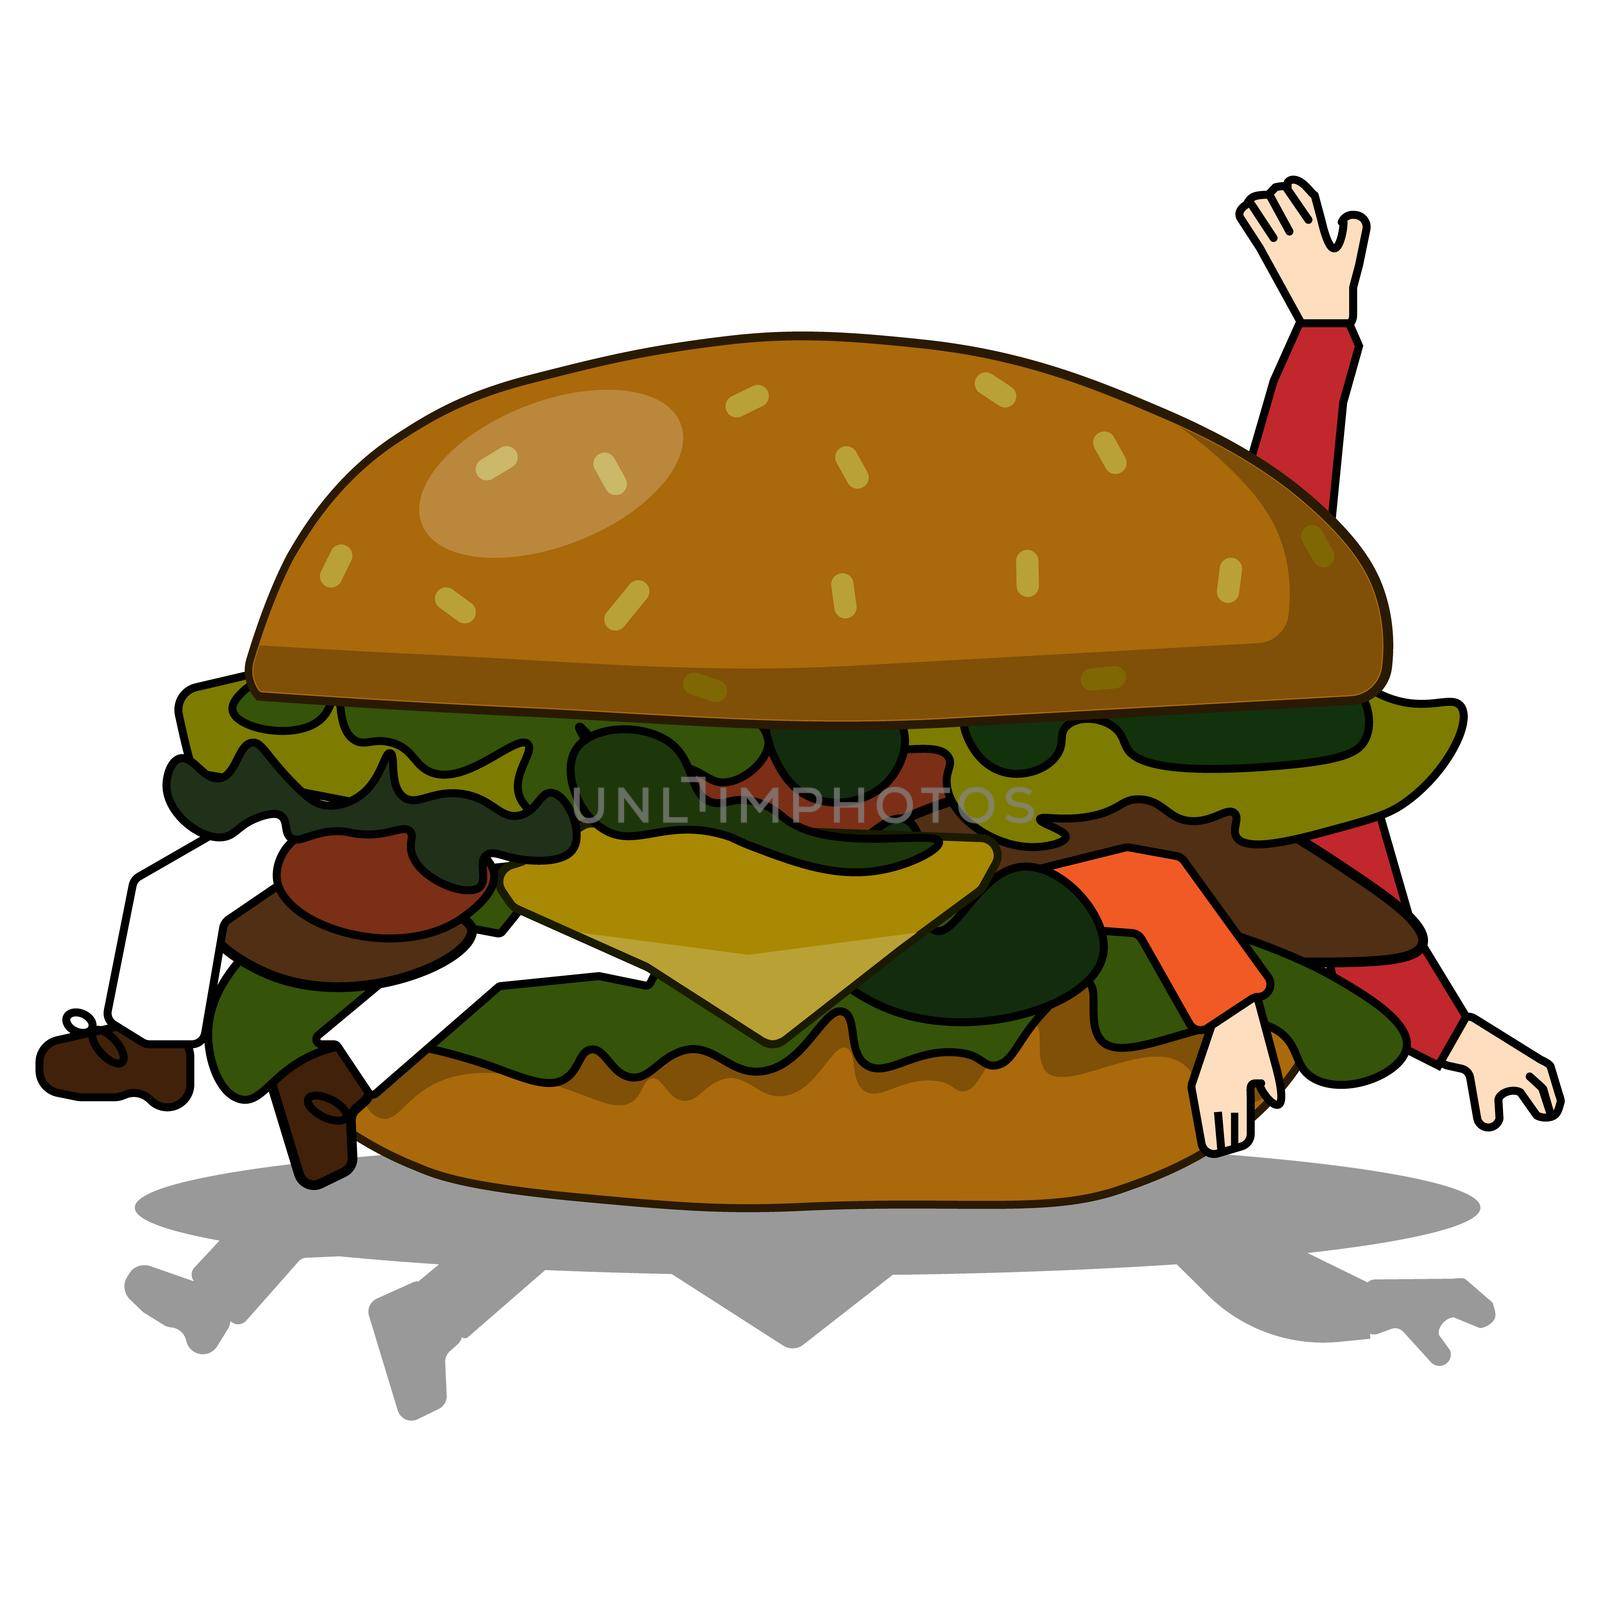 bad burger eating people illustration in flat style.